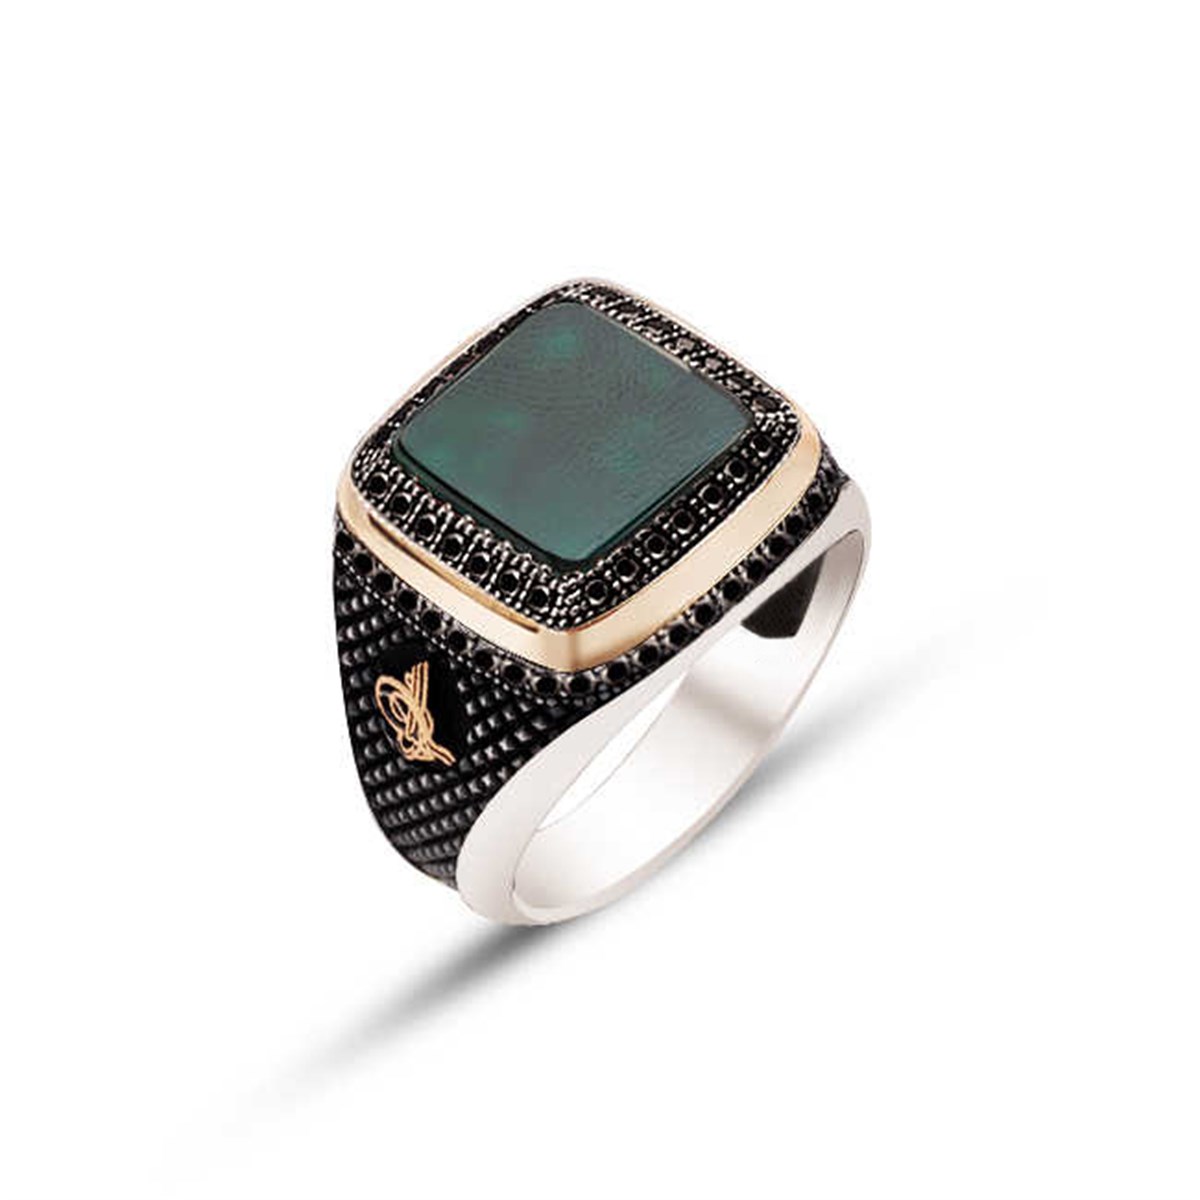 Silver Green Agate Stone Side Black Zircon Decorated Men's Ring